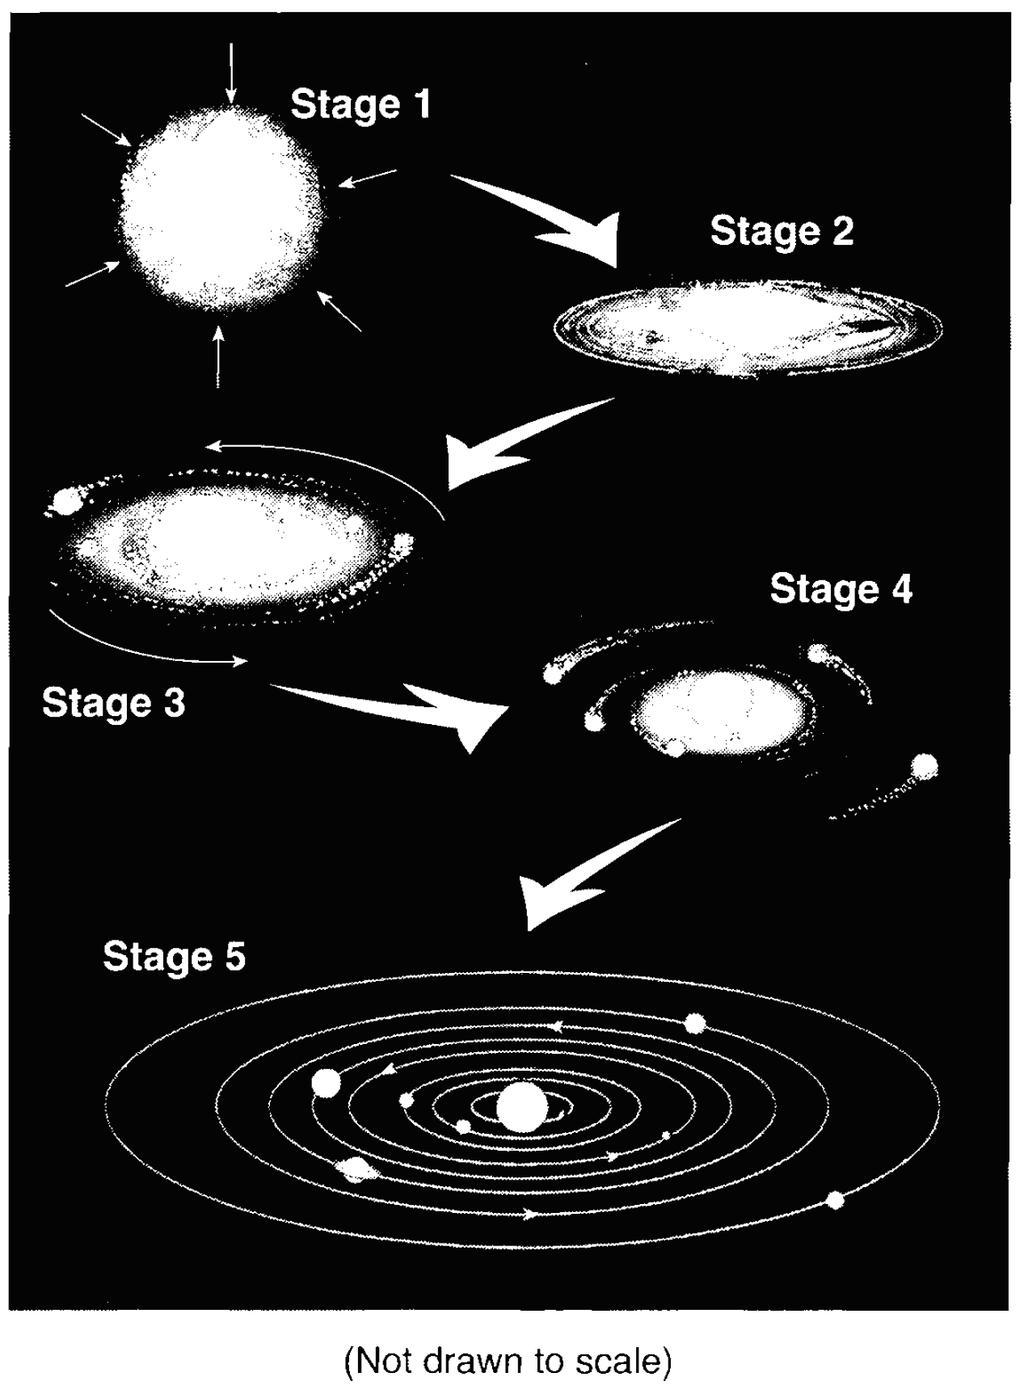 Base your answers to questions 114 through 116 on the diagram below. The diagram represents the inferred stages in the formation of our solar system. Stage 1 shows a contracting gas cloud.